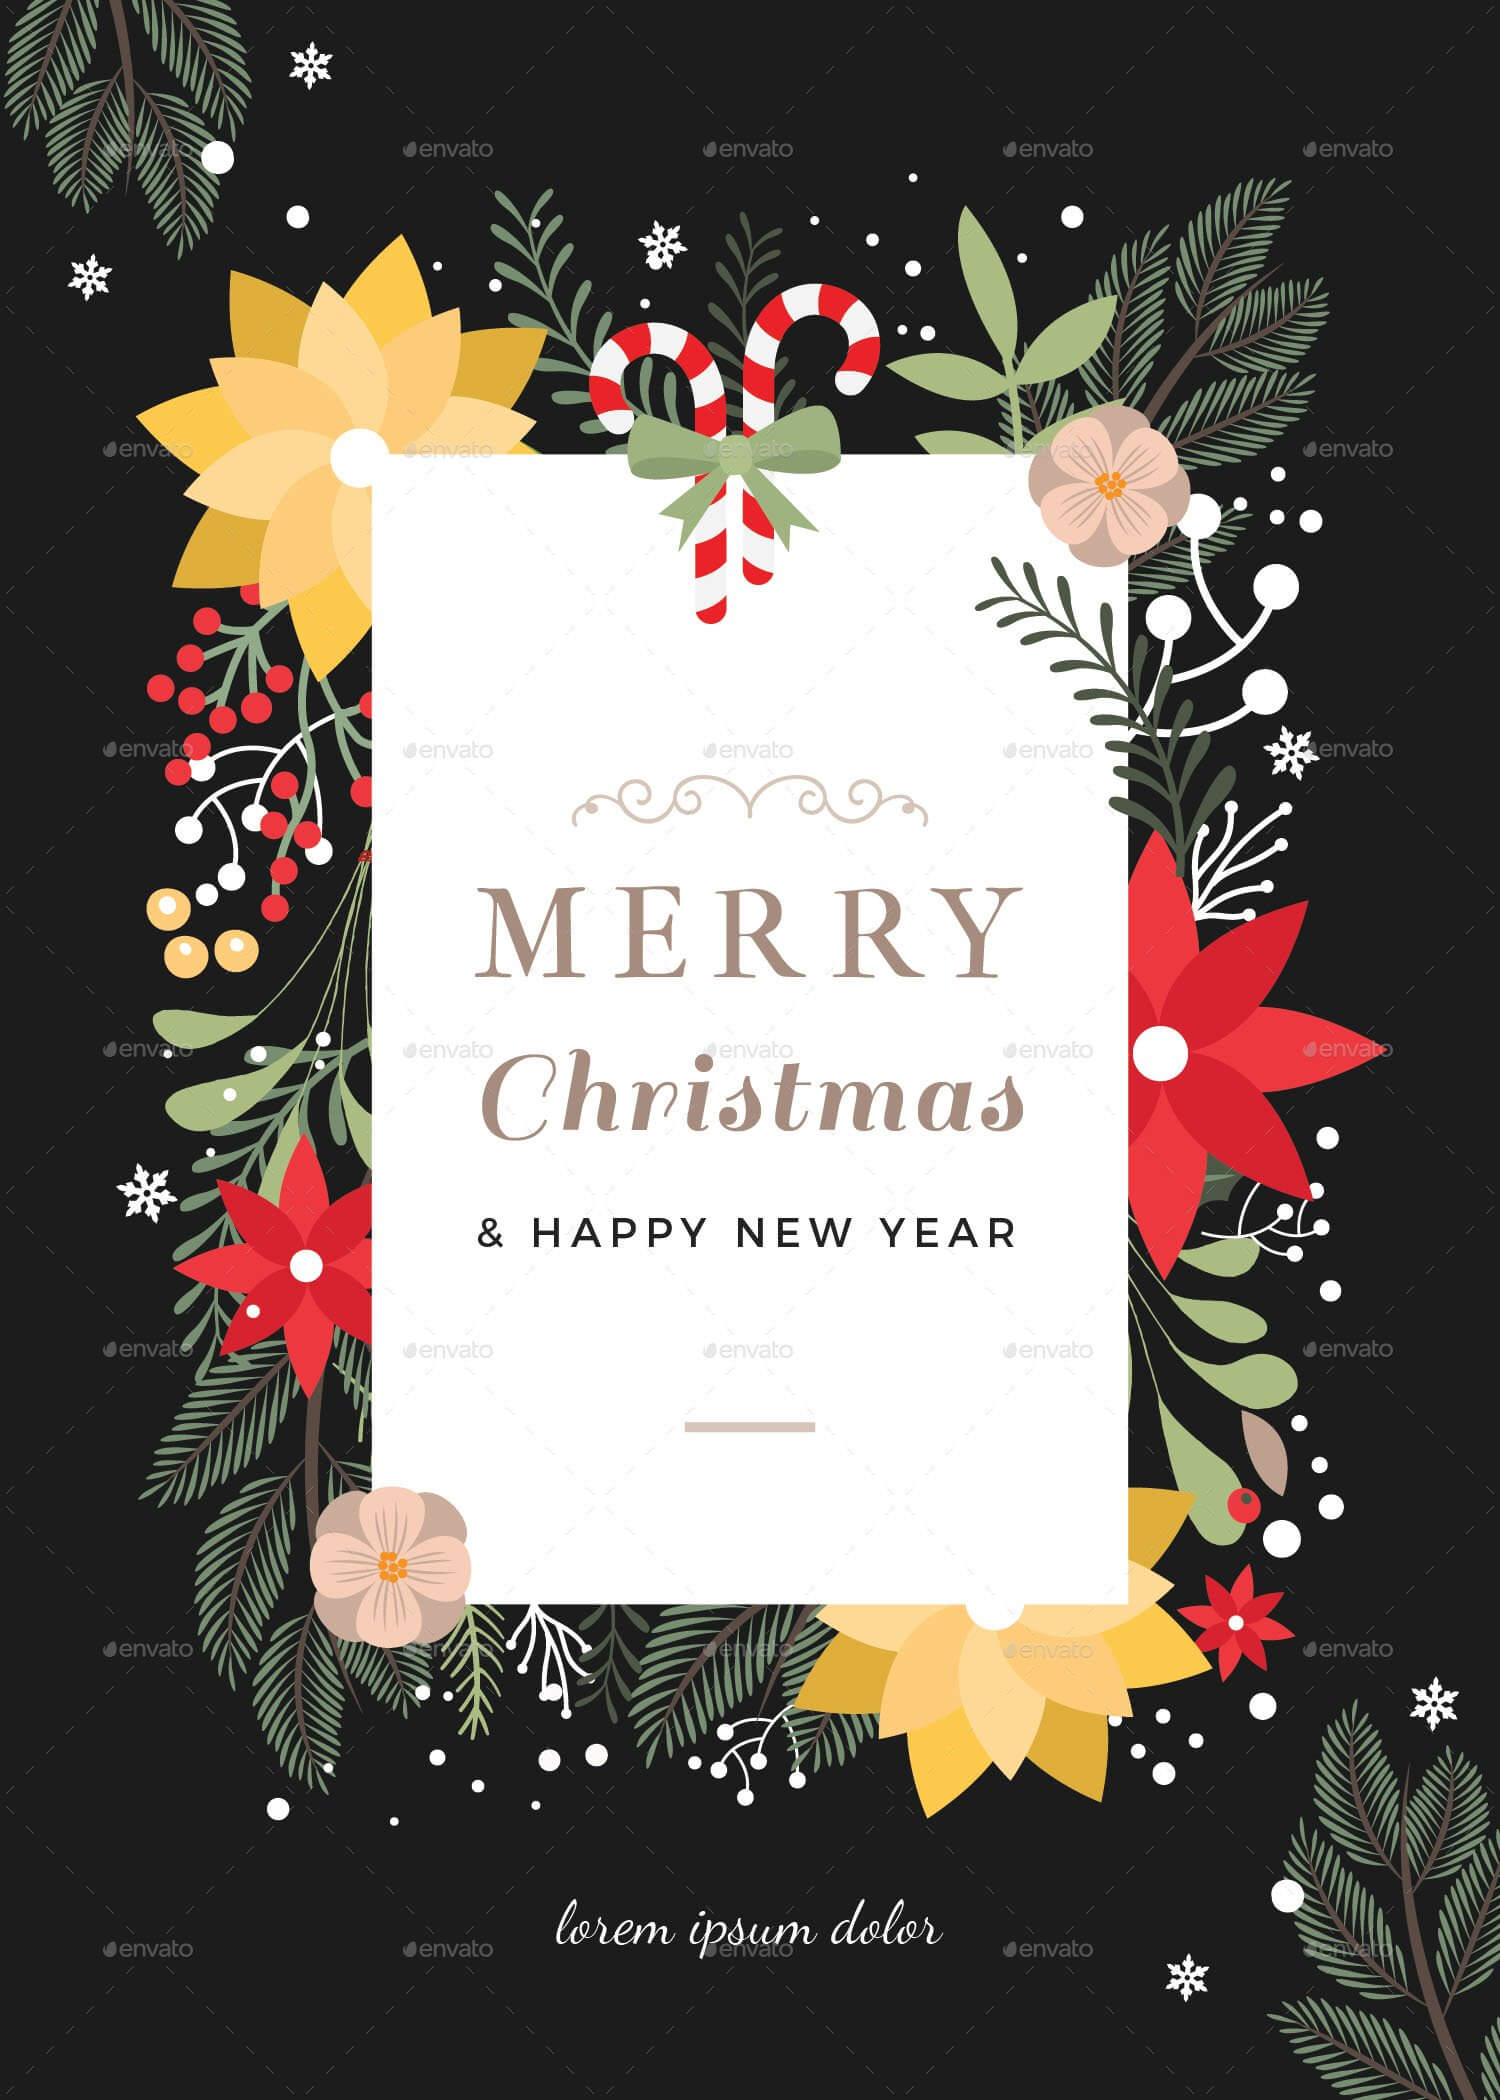 45+Christmas Premium & Free Psd Holiday Card Templates For Pertaining To Christmas Photo Cards Templates Free Downloads